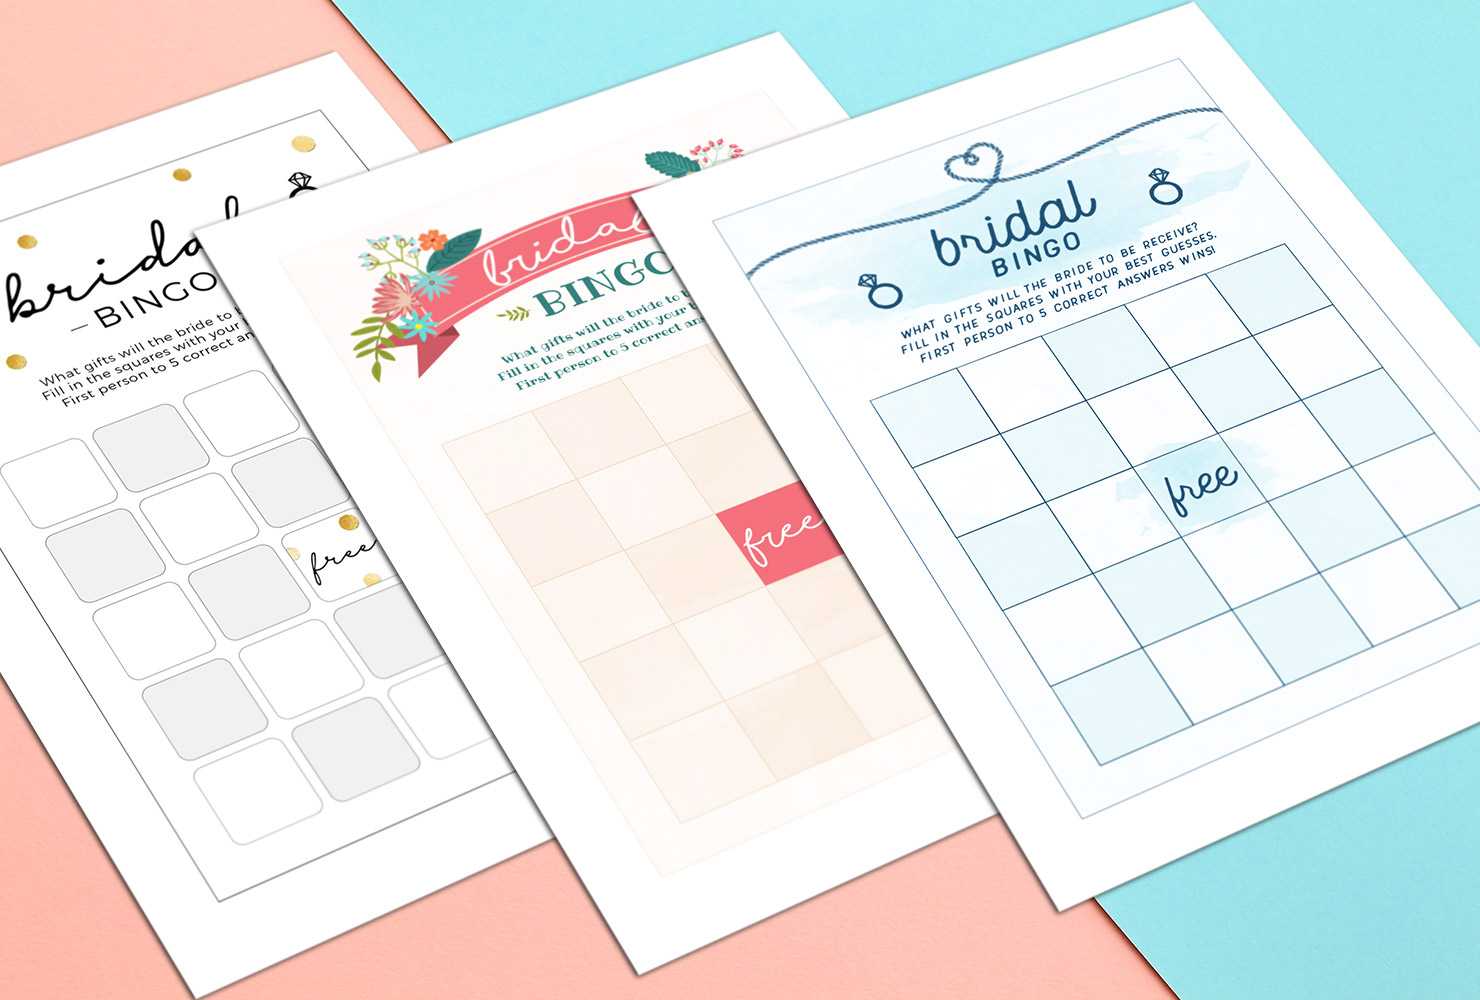 How To Play Bridal Shower Bingo (With Printables) | Shutterfly In Blank Bridal Shower Bingo Template